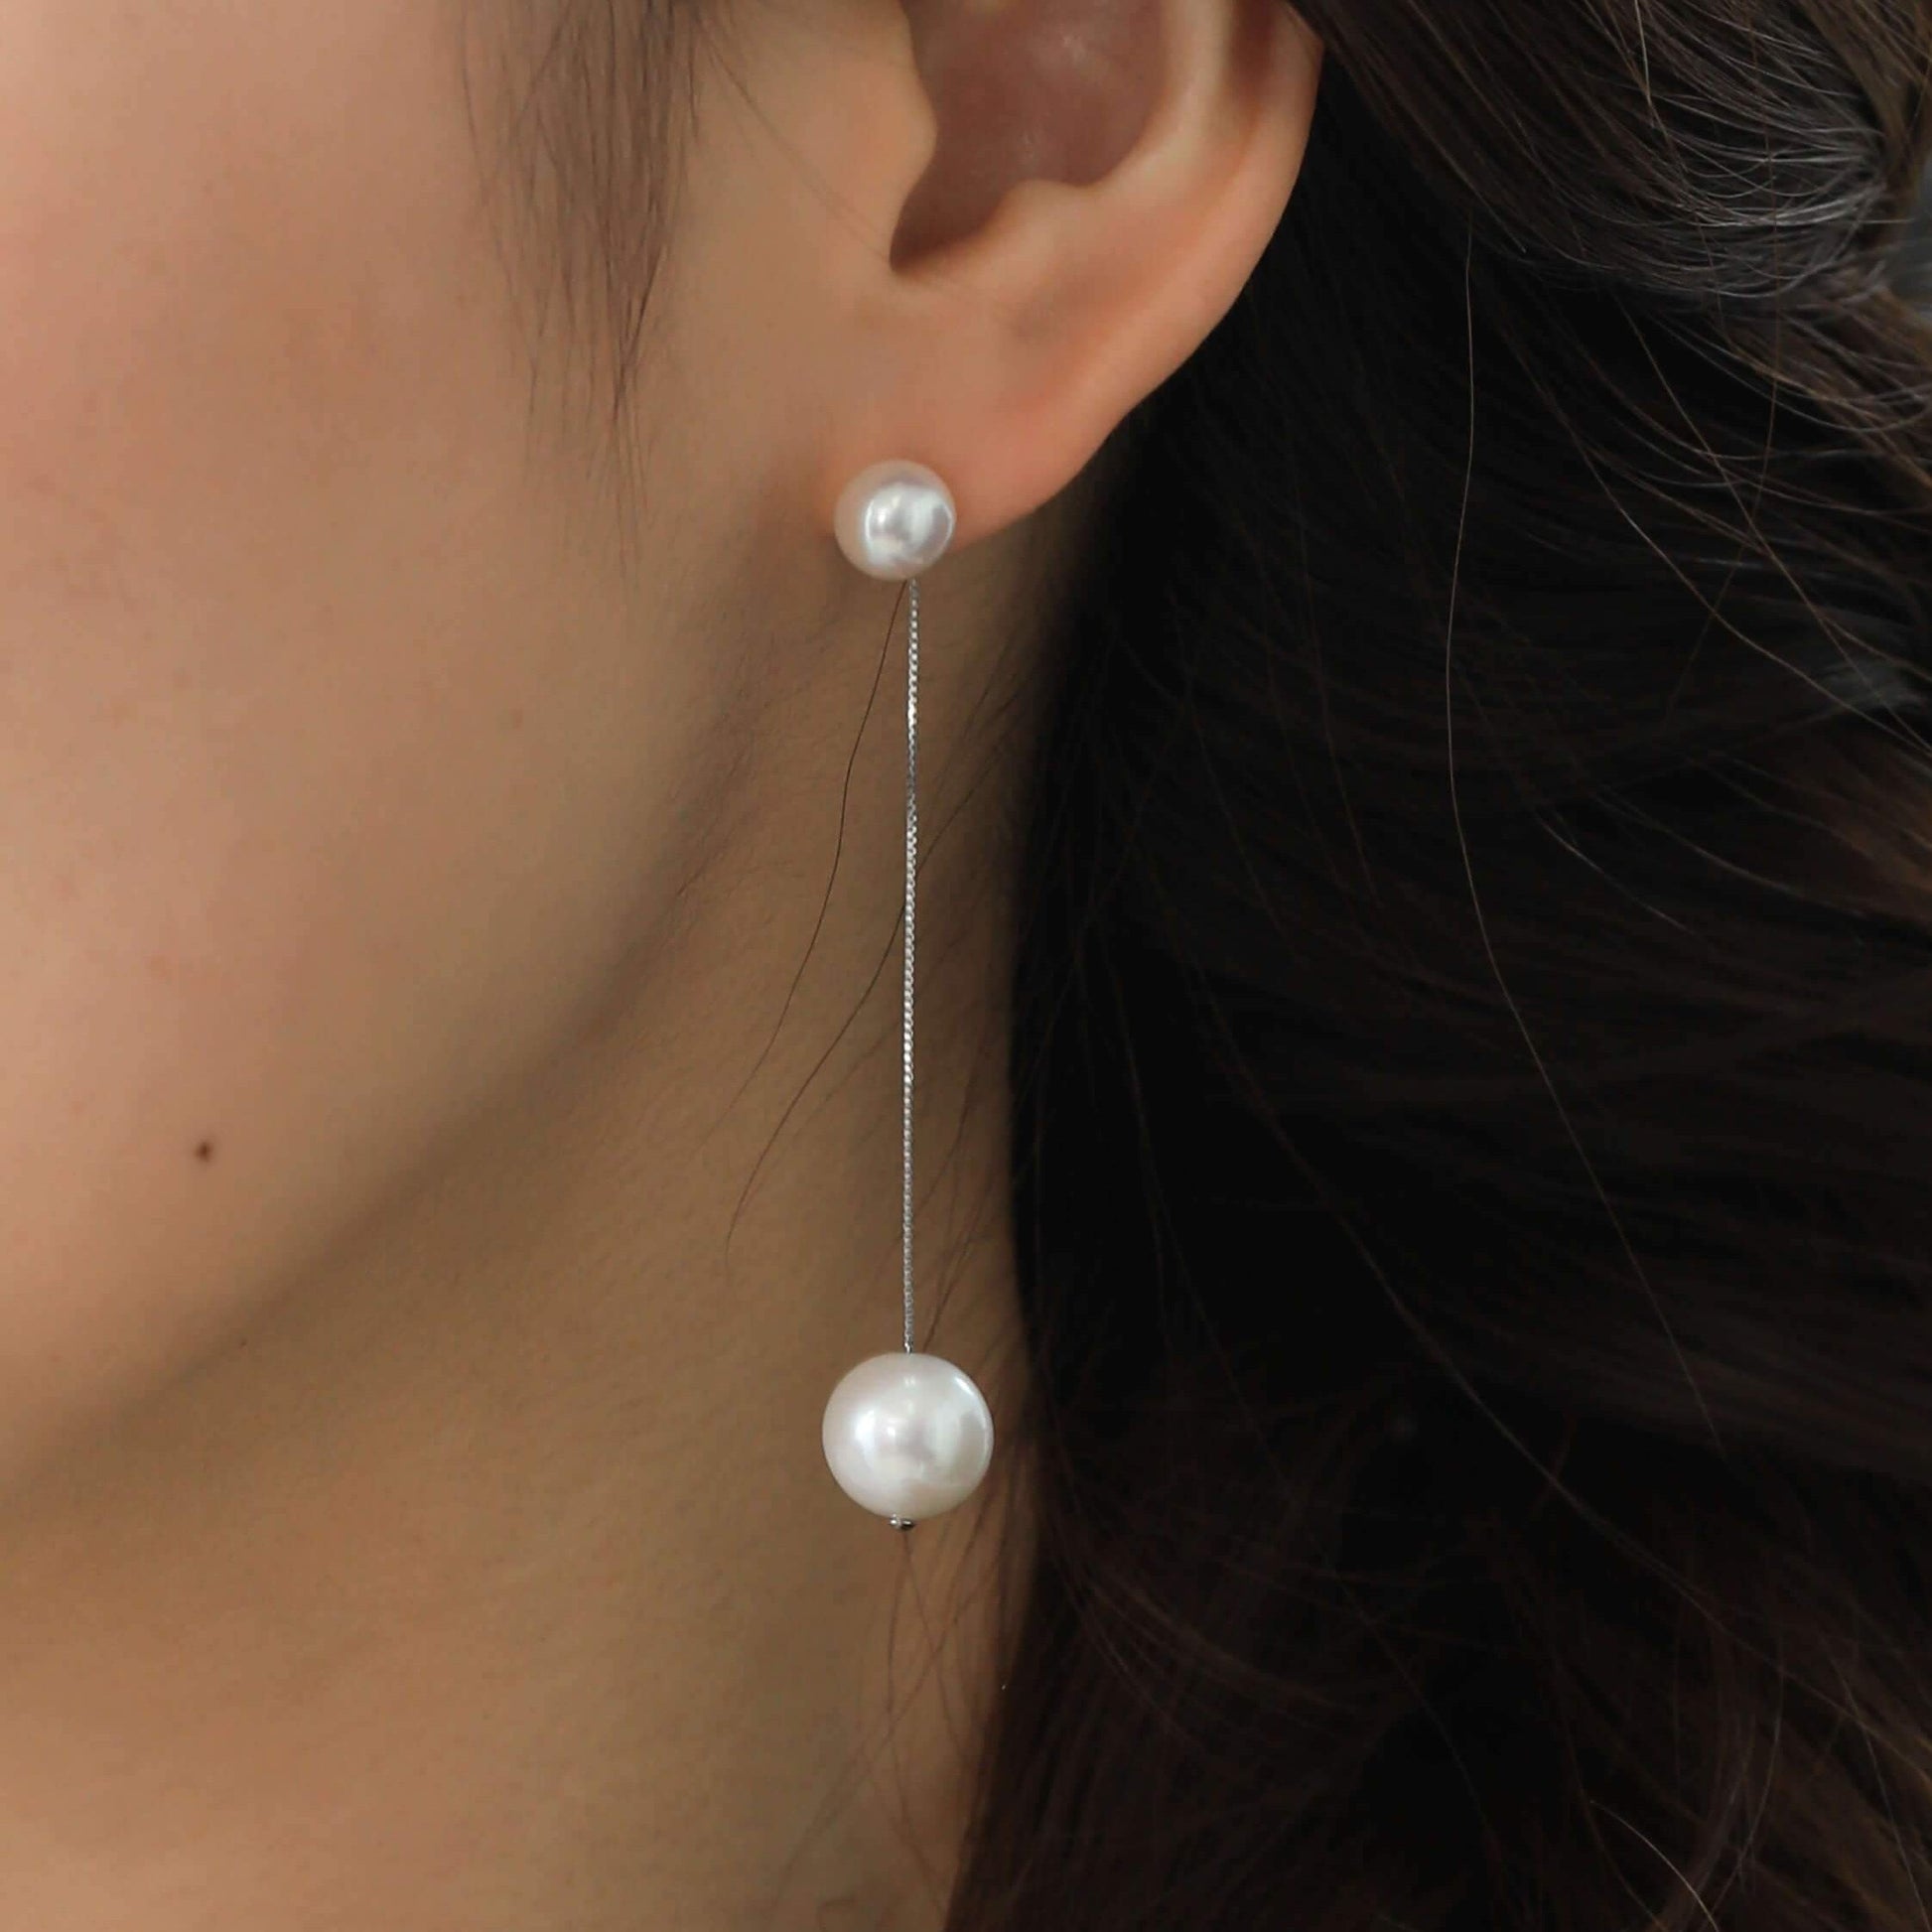 Enhance your elegance with Sway Pearl Piercing - a woman radiating grace in stunning pearl earrings.